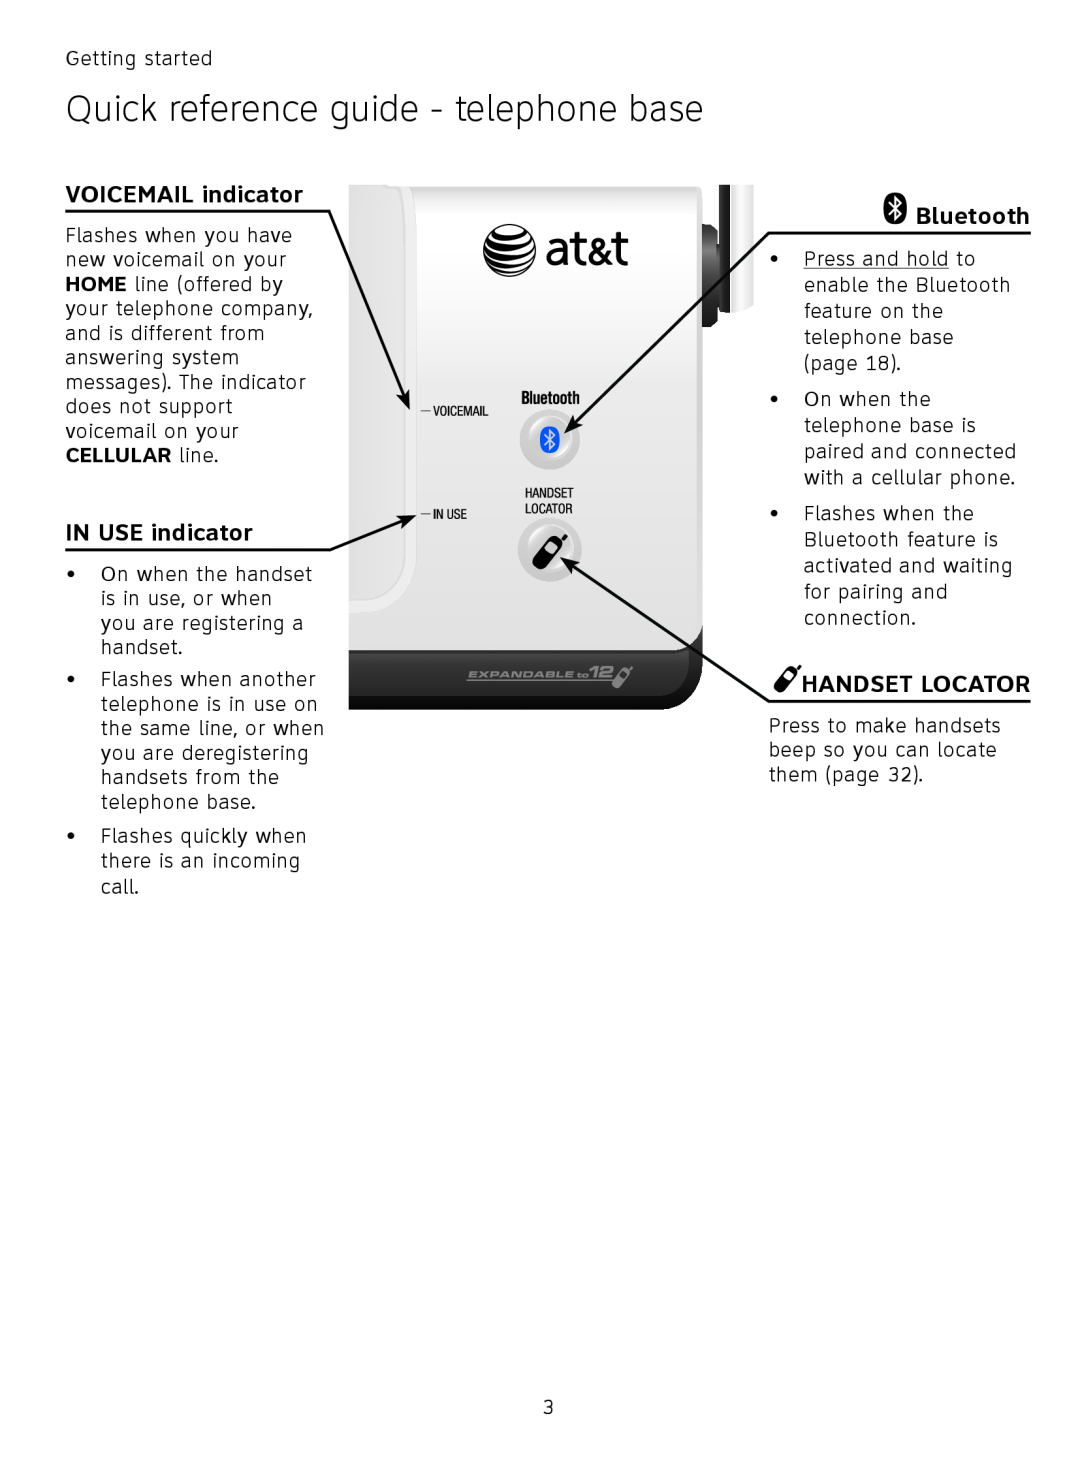 AT&T TL9178 Quick reference guide - telephone base, VOICEMAIL indicator, IN USE indicator, Bluetooth, Handset Locator 